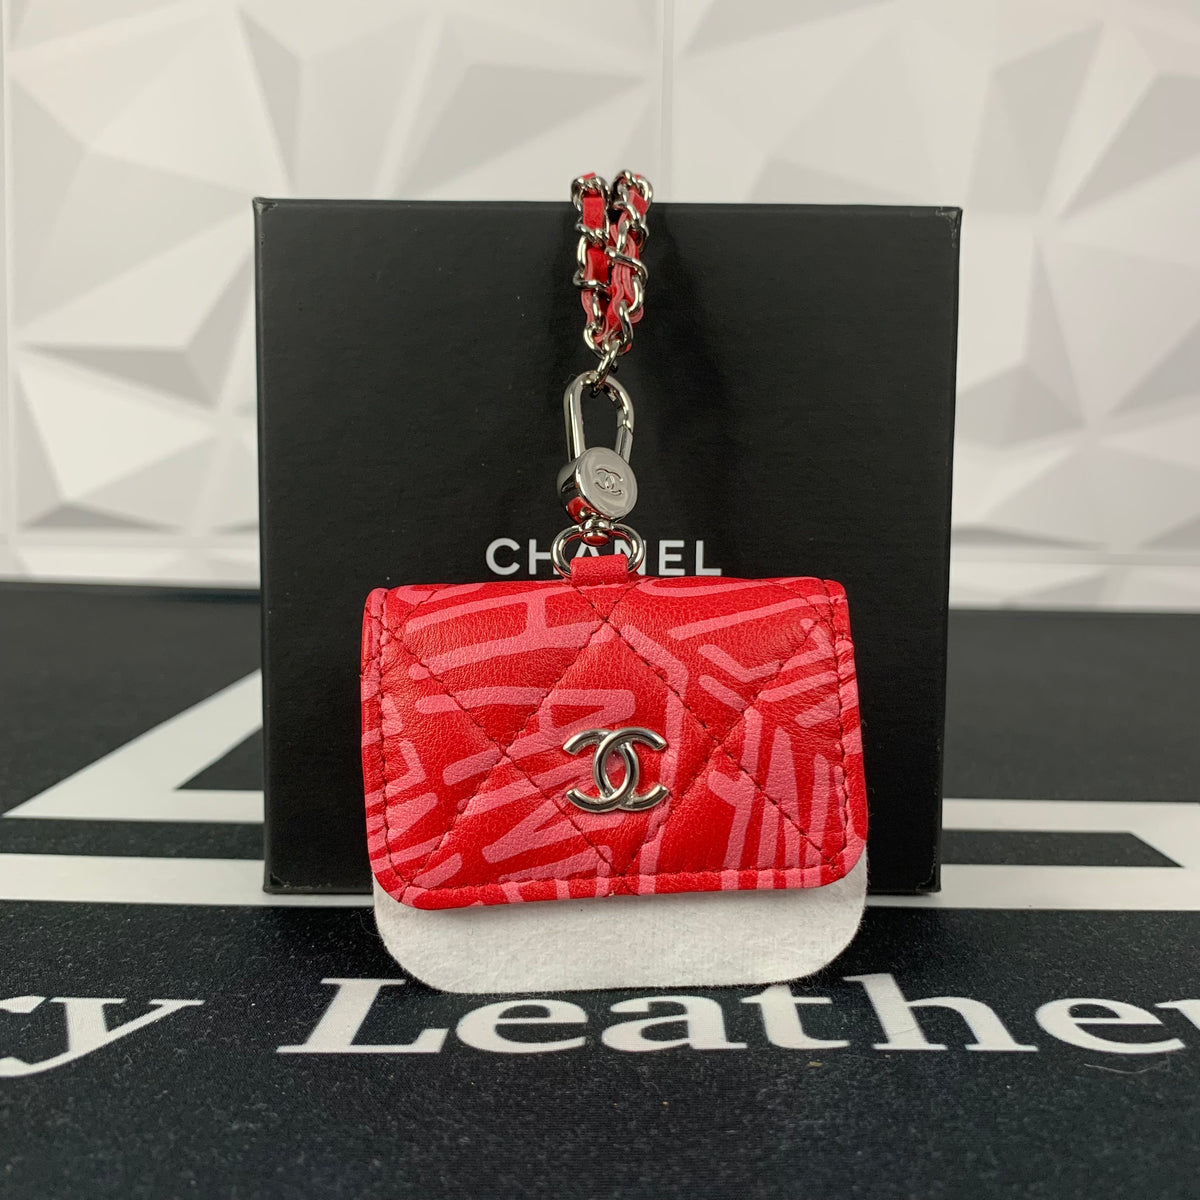 Chanel 2021 Airpods Pro Case w/ Tags - Pink Technology, Accessories -  CHA581191